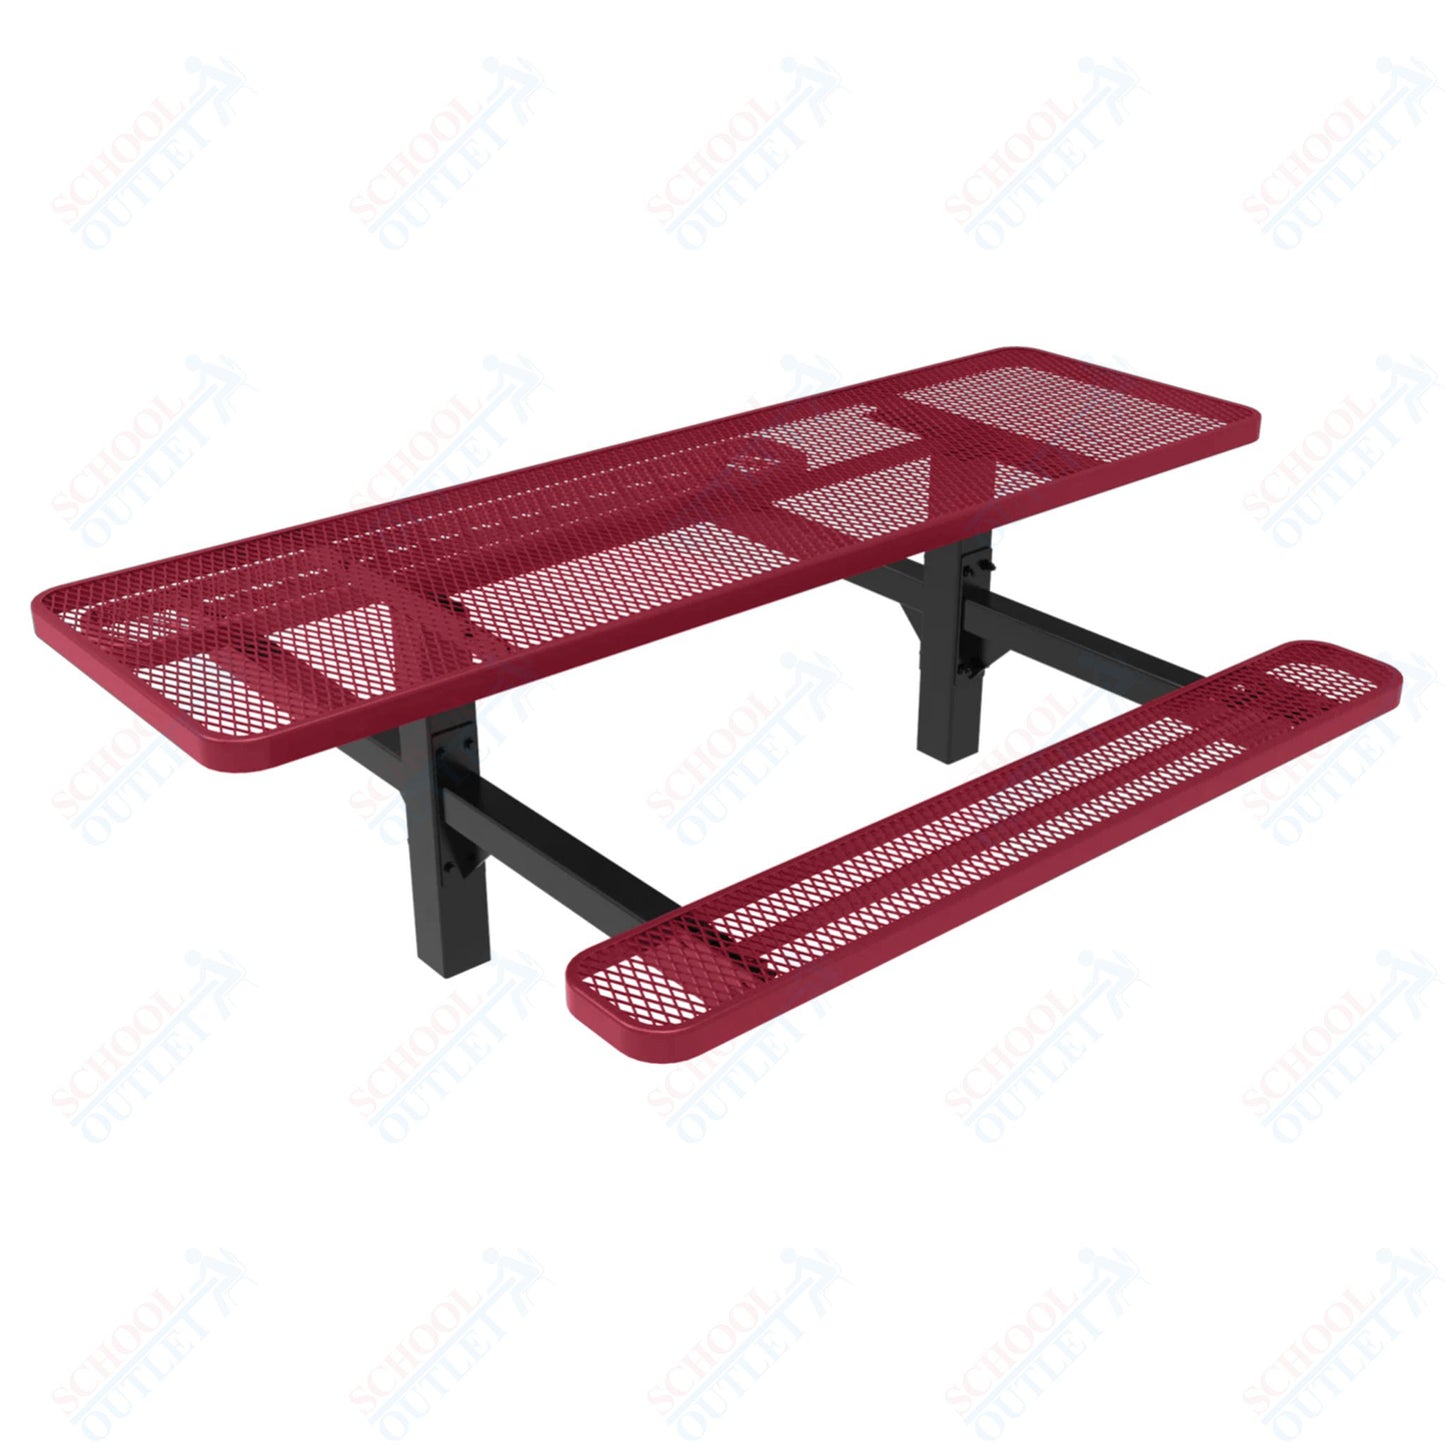 MyTcoat MYT-TRT08-08 8′ Rectangular Double Pedestal Picnic Table with Inground Mount (96"W x 75.5"D x 28.2"H)